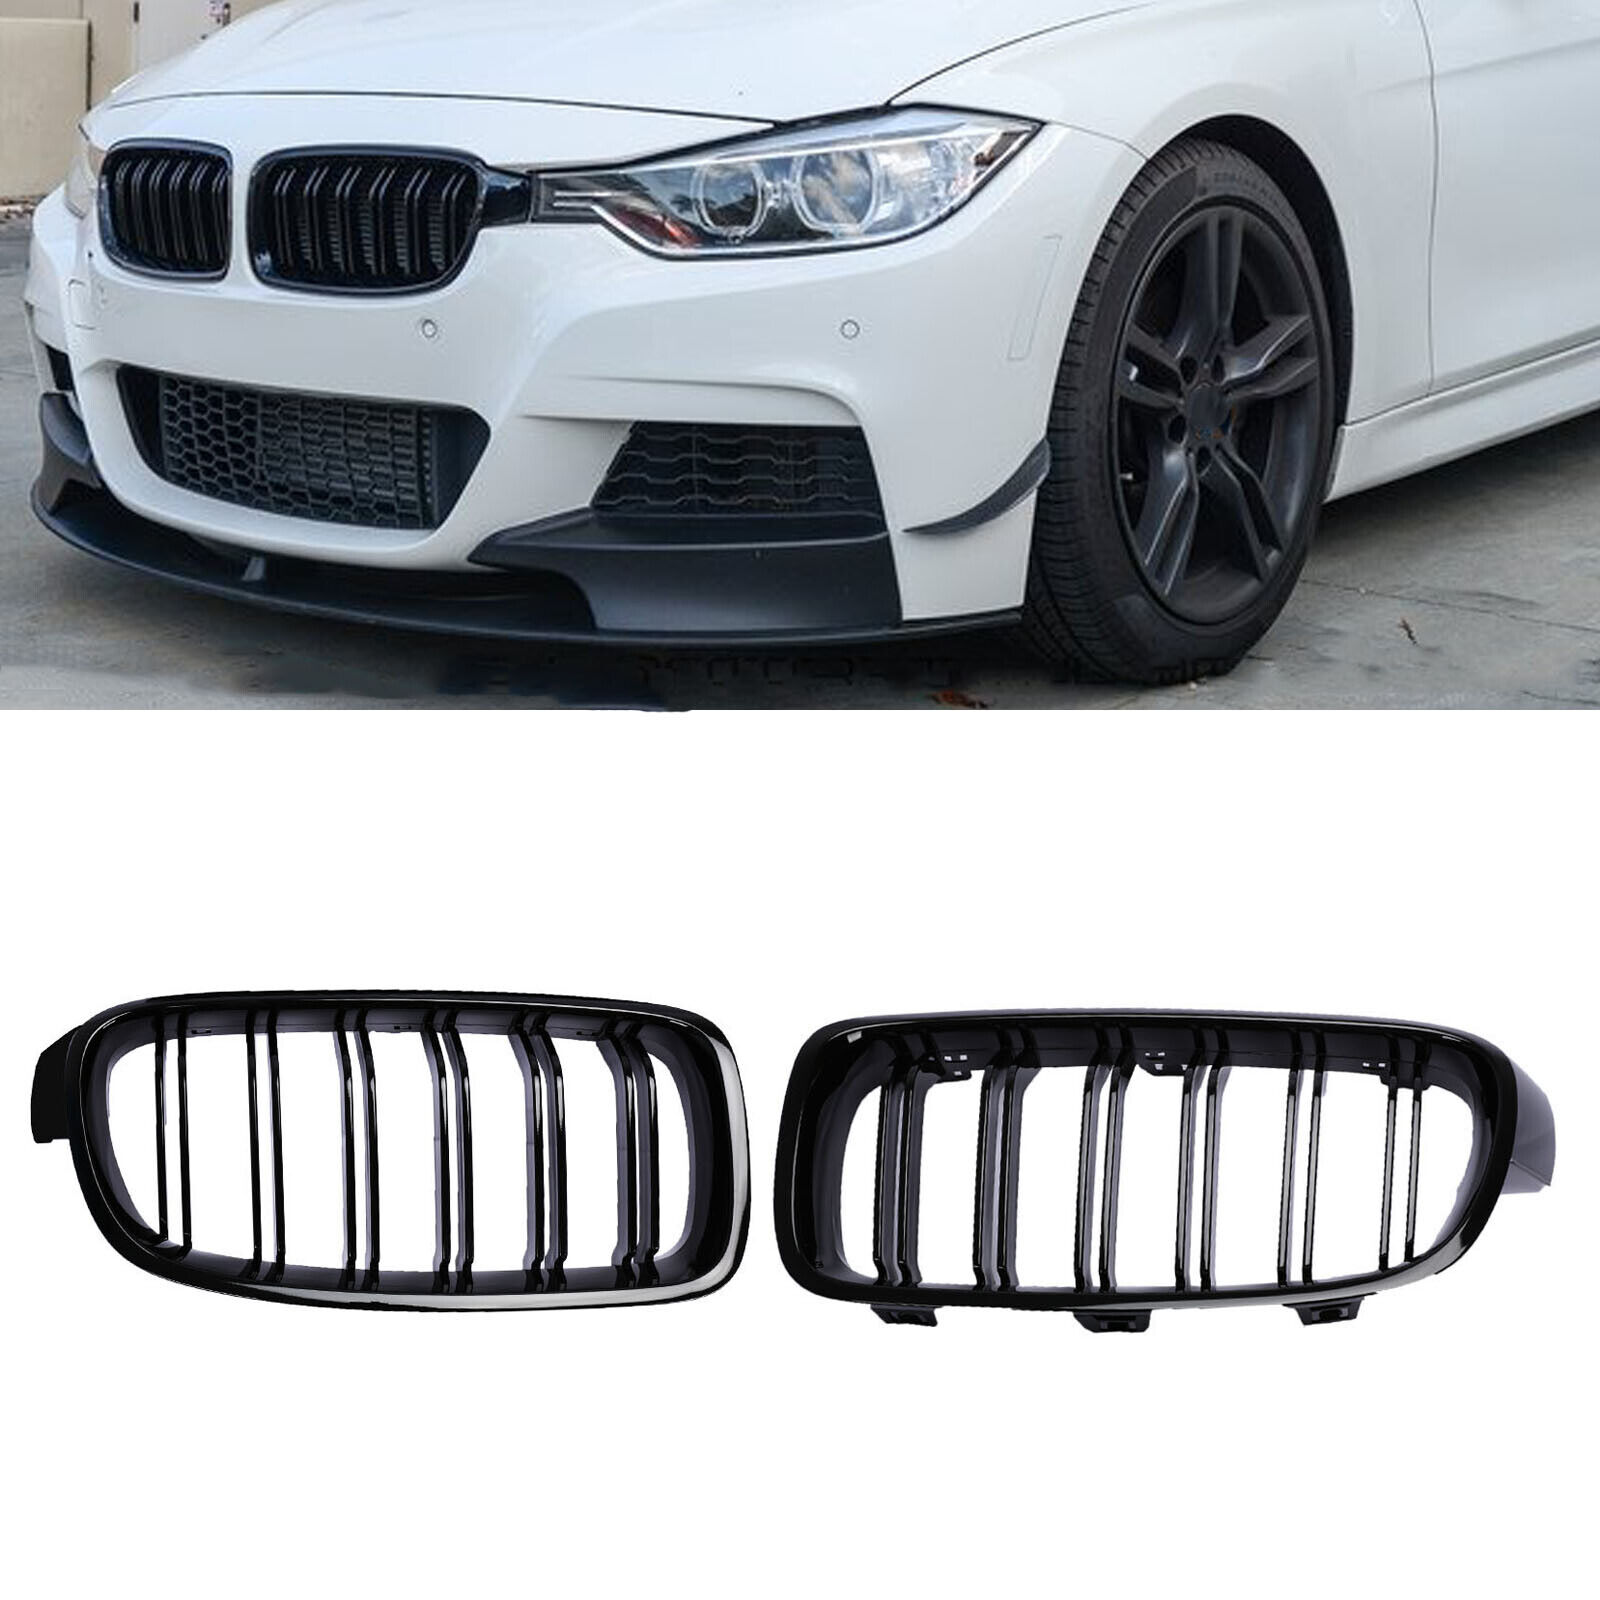 Front Kidney Grill Grille For 12-18 BMW F30 3 series 330i 328i Gloss Black